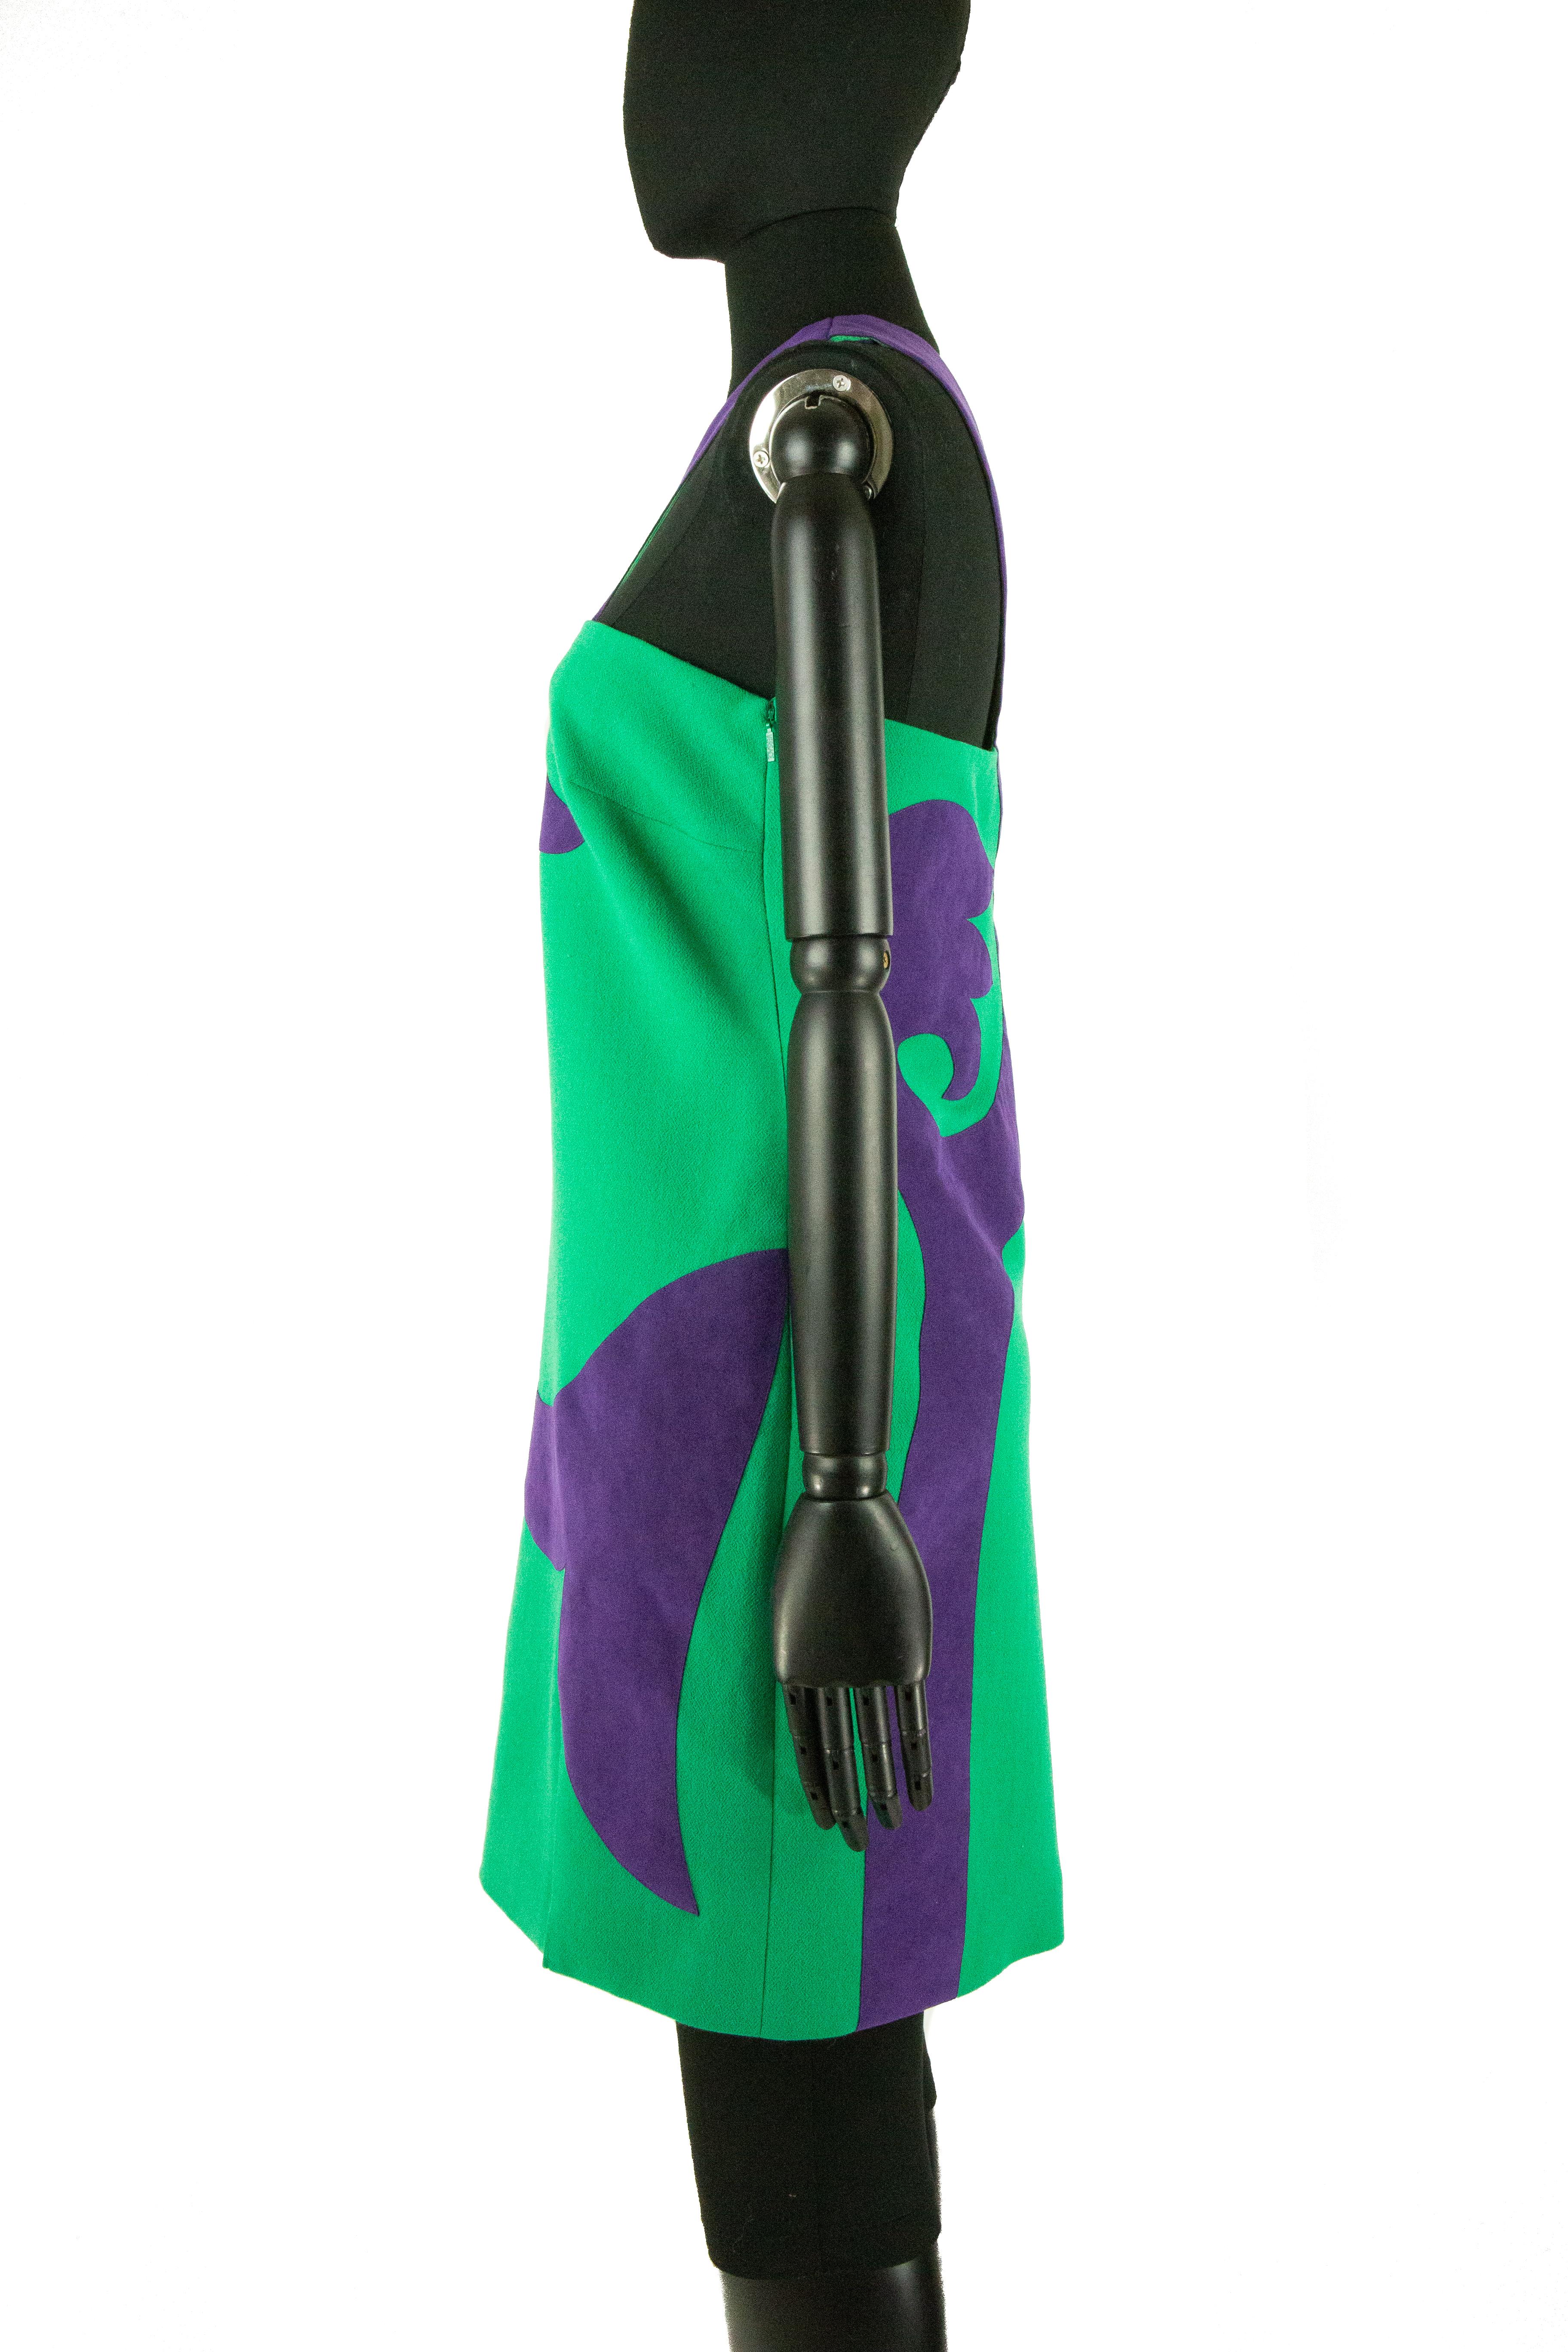 A contemporary Versace minidress in green with a swirled purple motif in purple suede. The motif then grows into the asymmetrical one shoulder. The dress also has a short thigh slit, finished with an invisible side zipper.